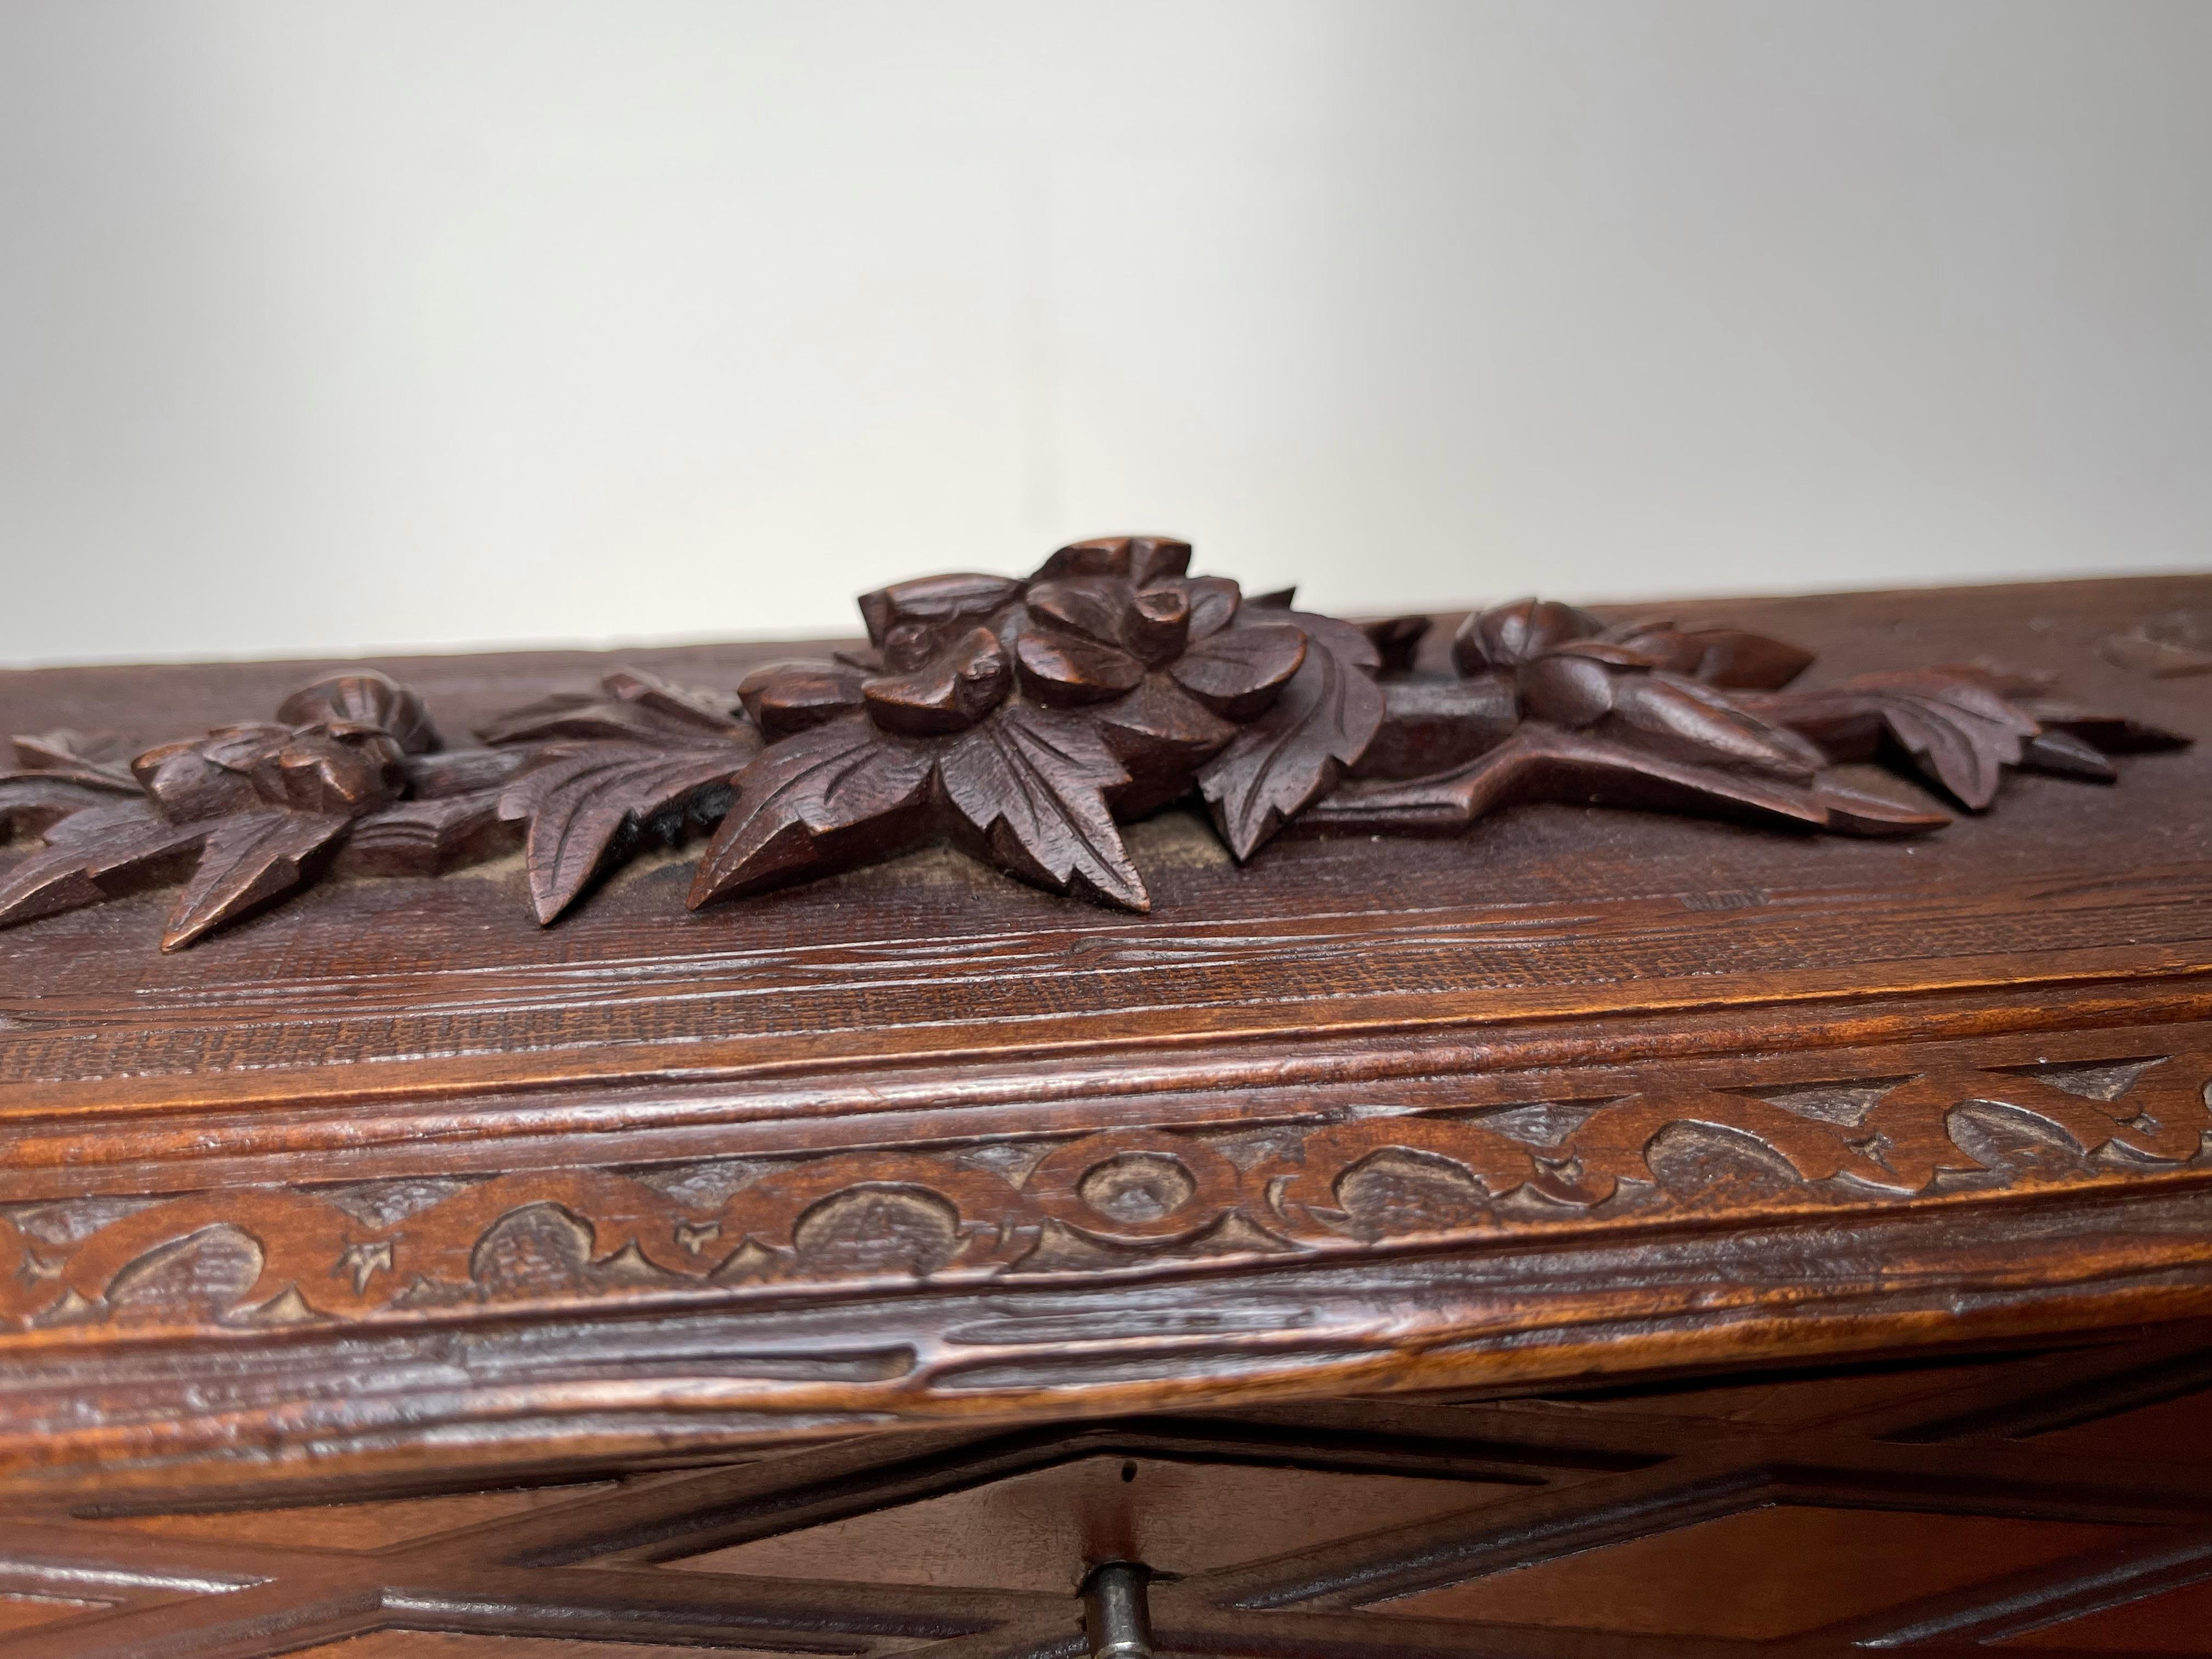 19th Century Large Size & Great Quality Carved Jewelry, Treasure or Collecting Box / Casket For Sale